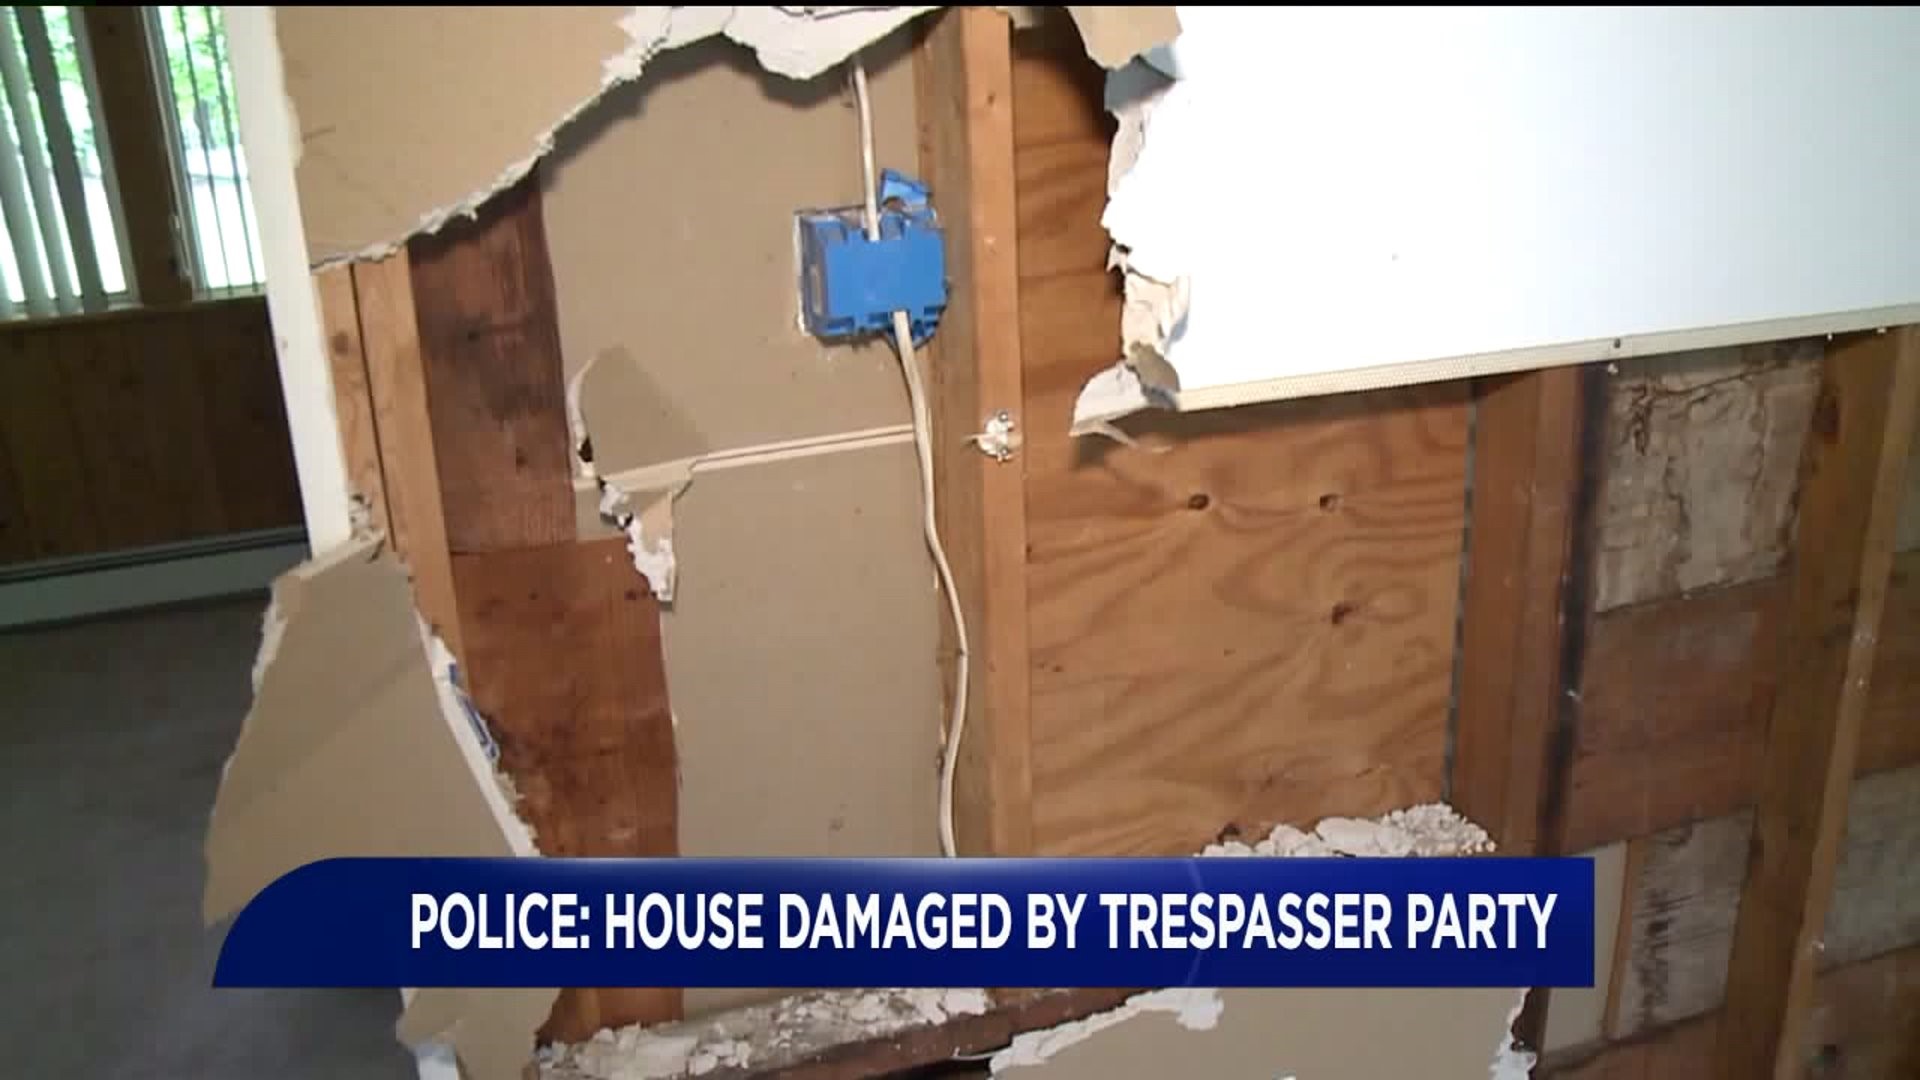 Police: House Damaged by Trespasser Party